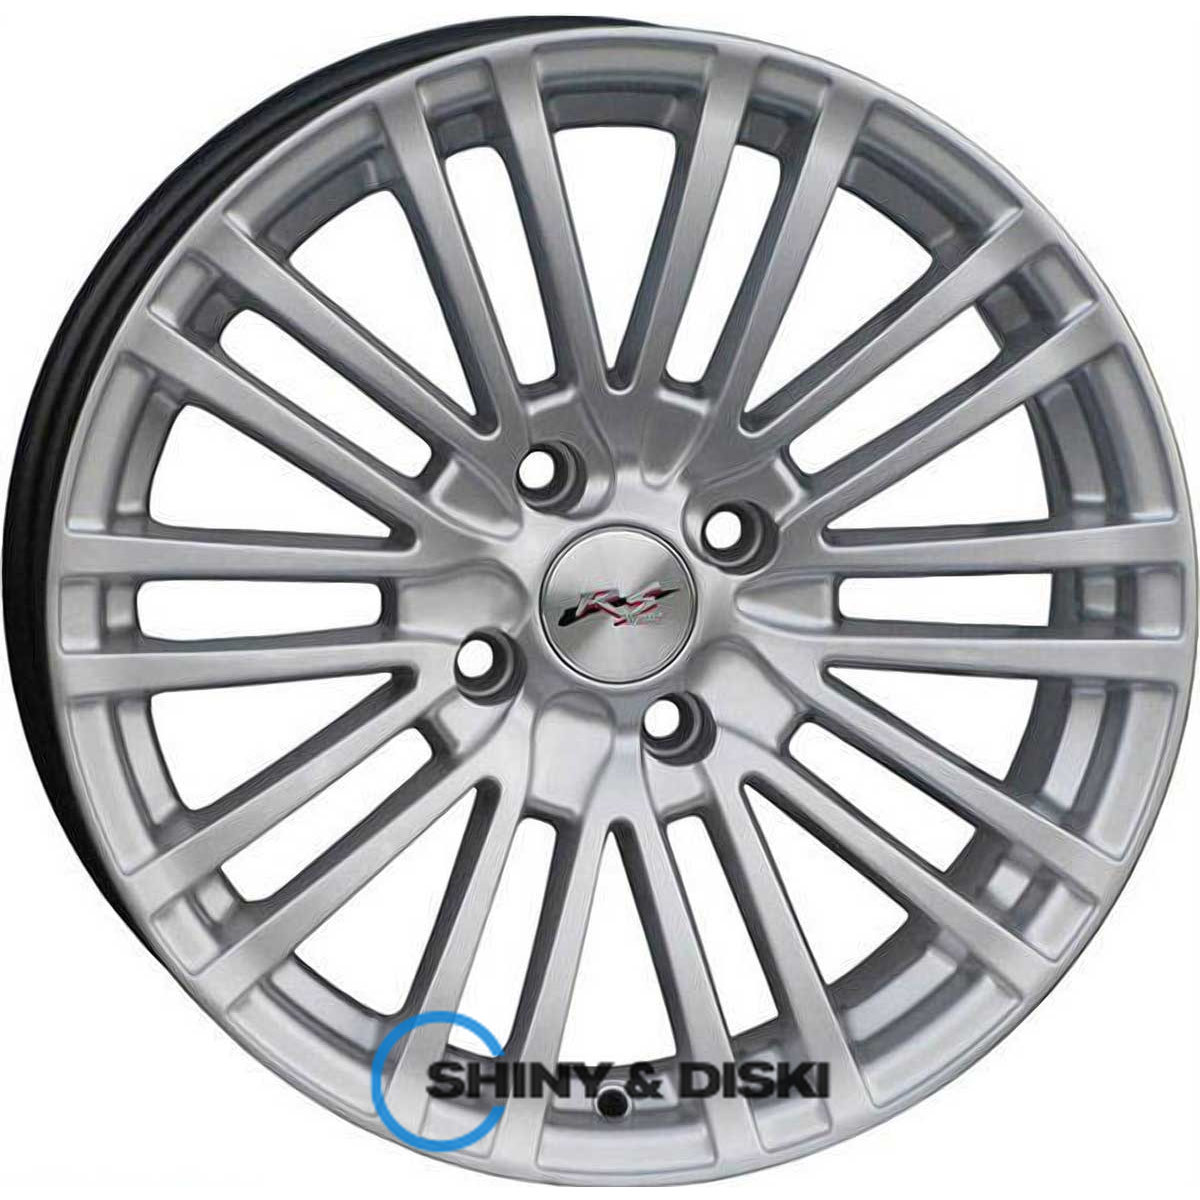 rs tuning 238 hs r16 w7 pcd5x112 et45 dia57.1